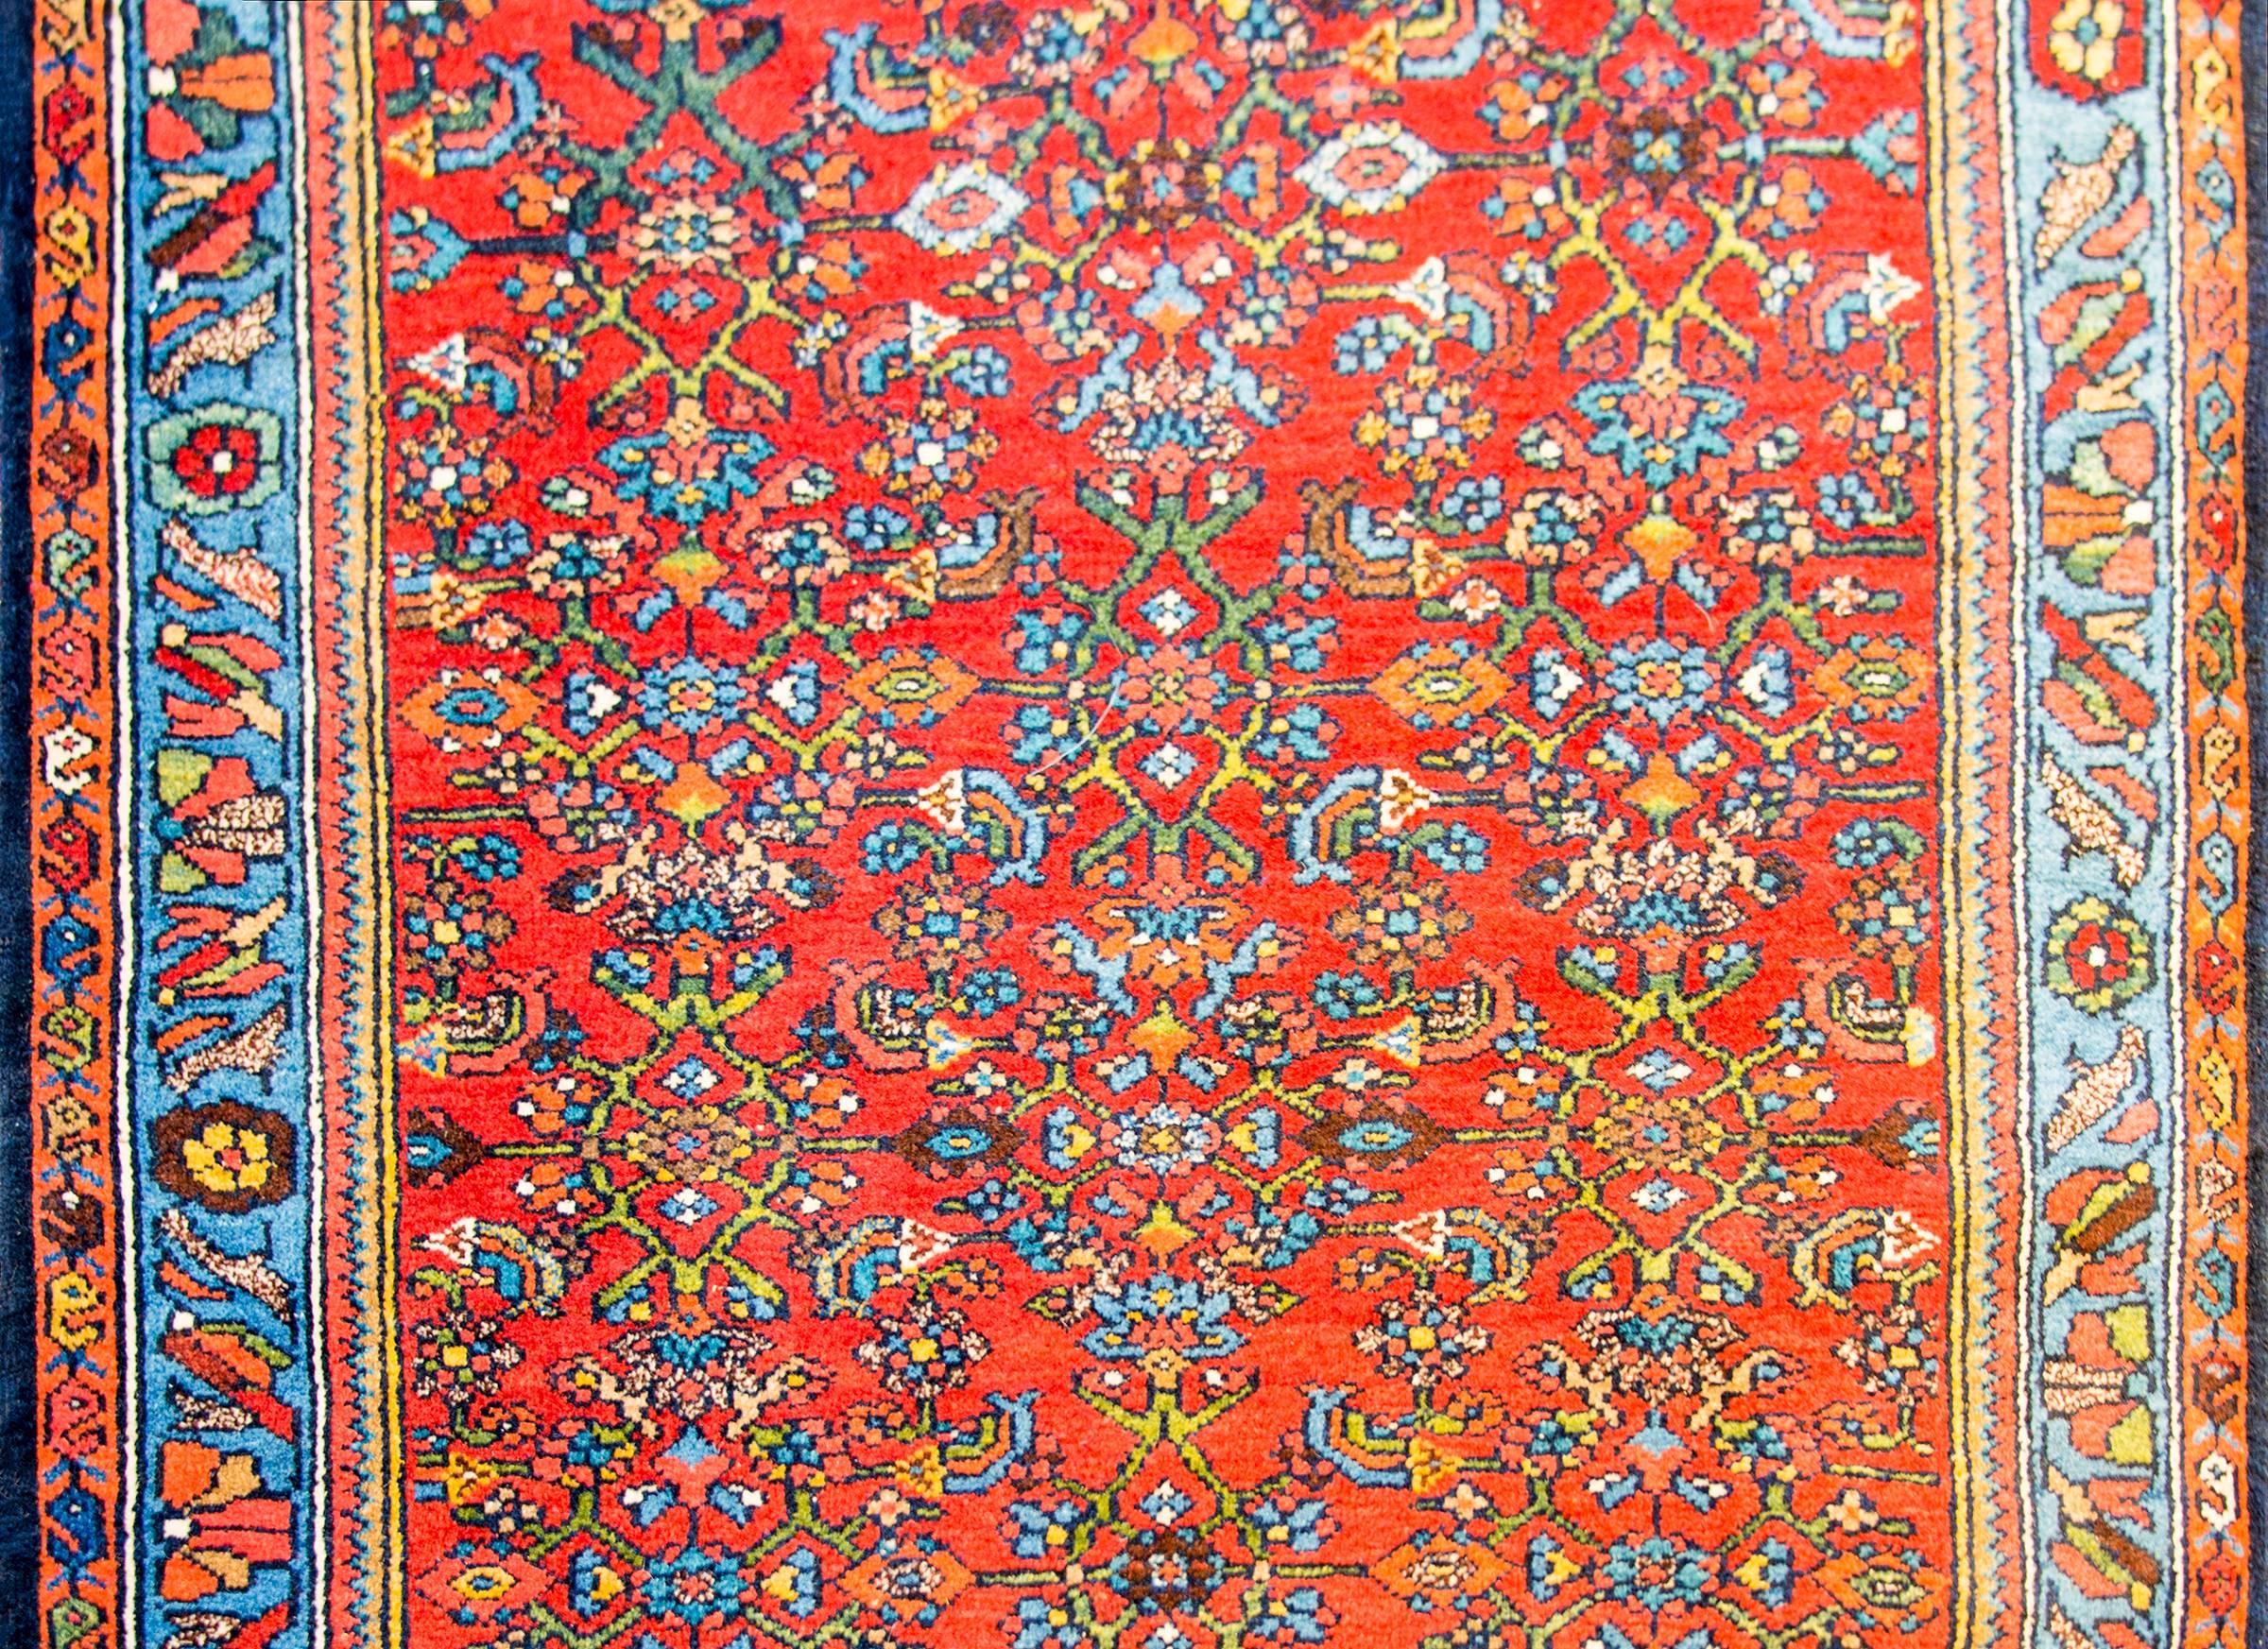 A wonderful early 20th century Persian Bidjar rug with an all-over lattice floral pattern woven in light and dark indigo, gold, green, and pink, on a beautiful crimson background. The border is amazing, composed of multiple floral patterned stripes.